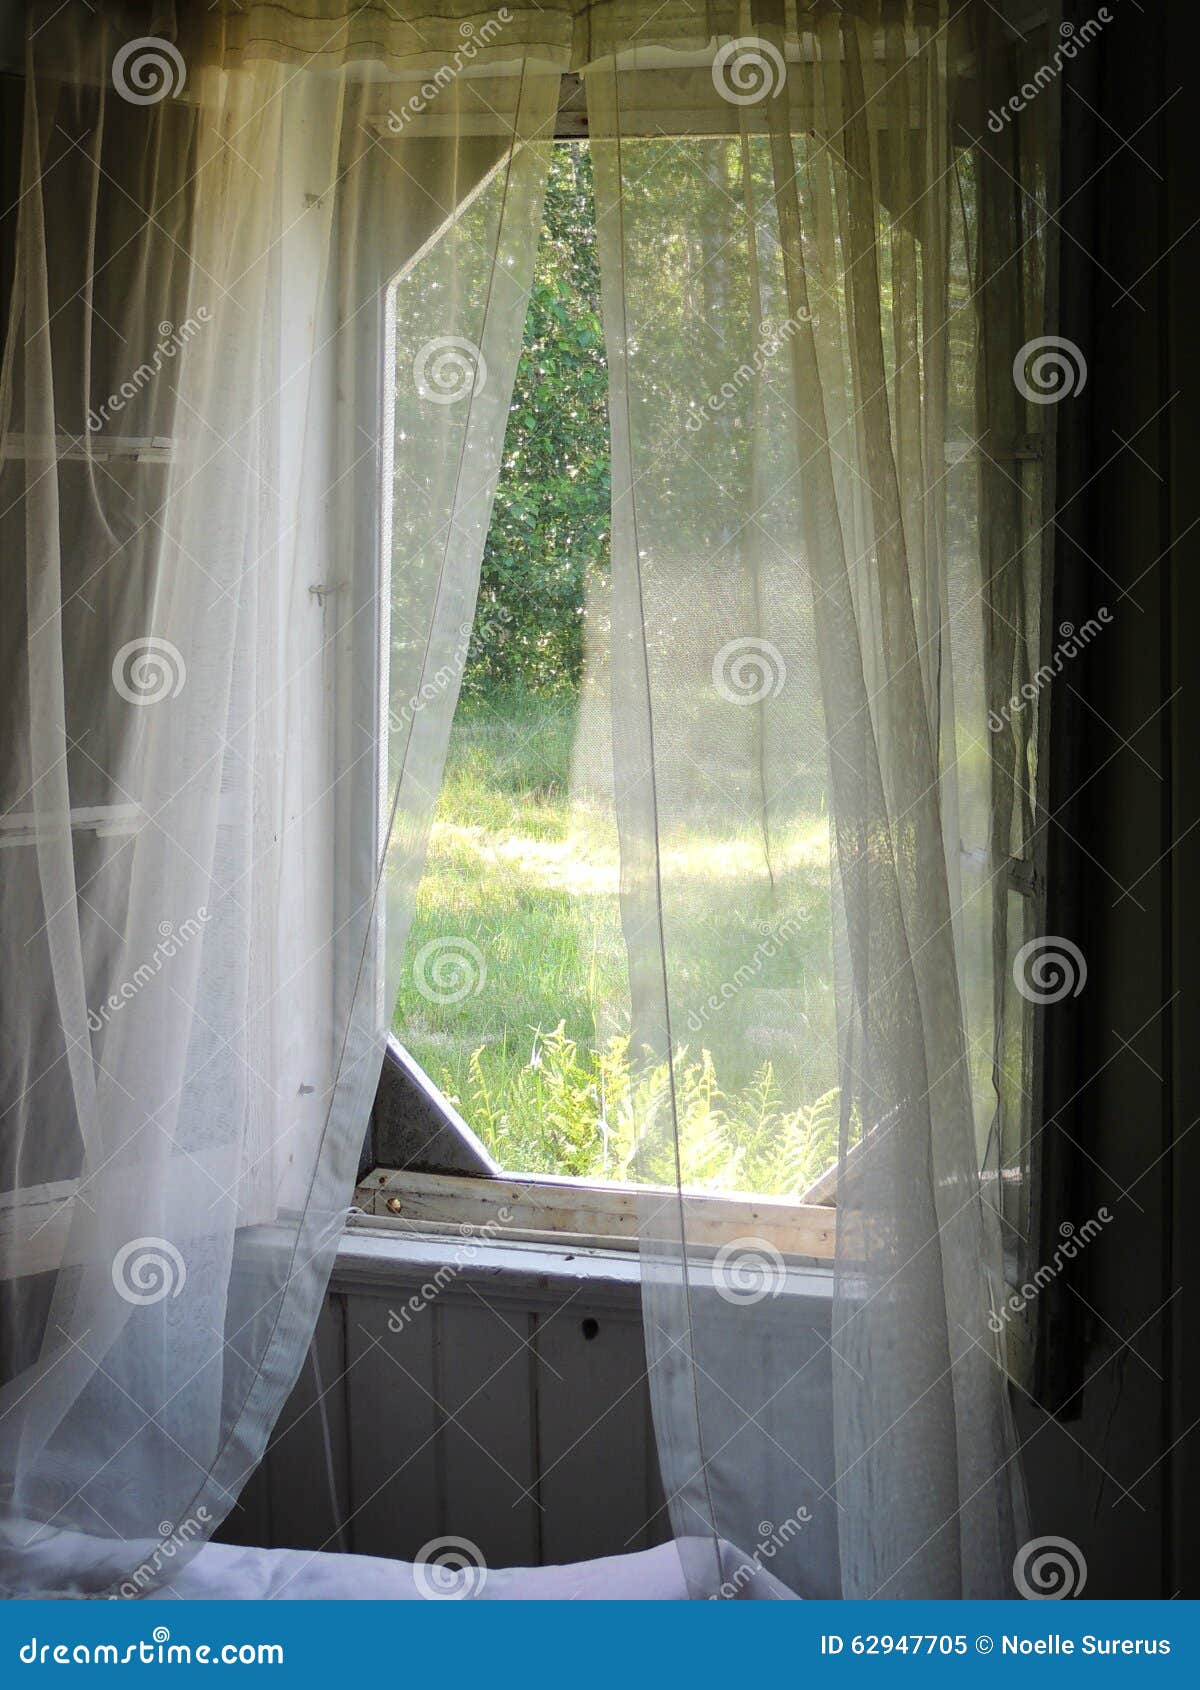 curtains in the breeze